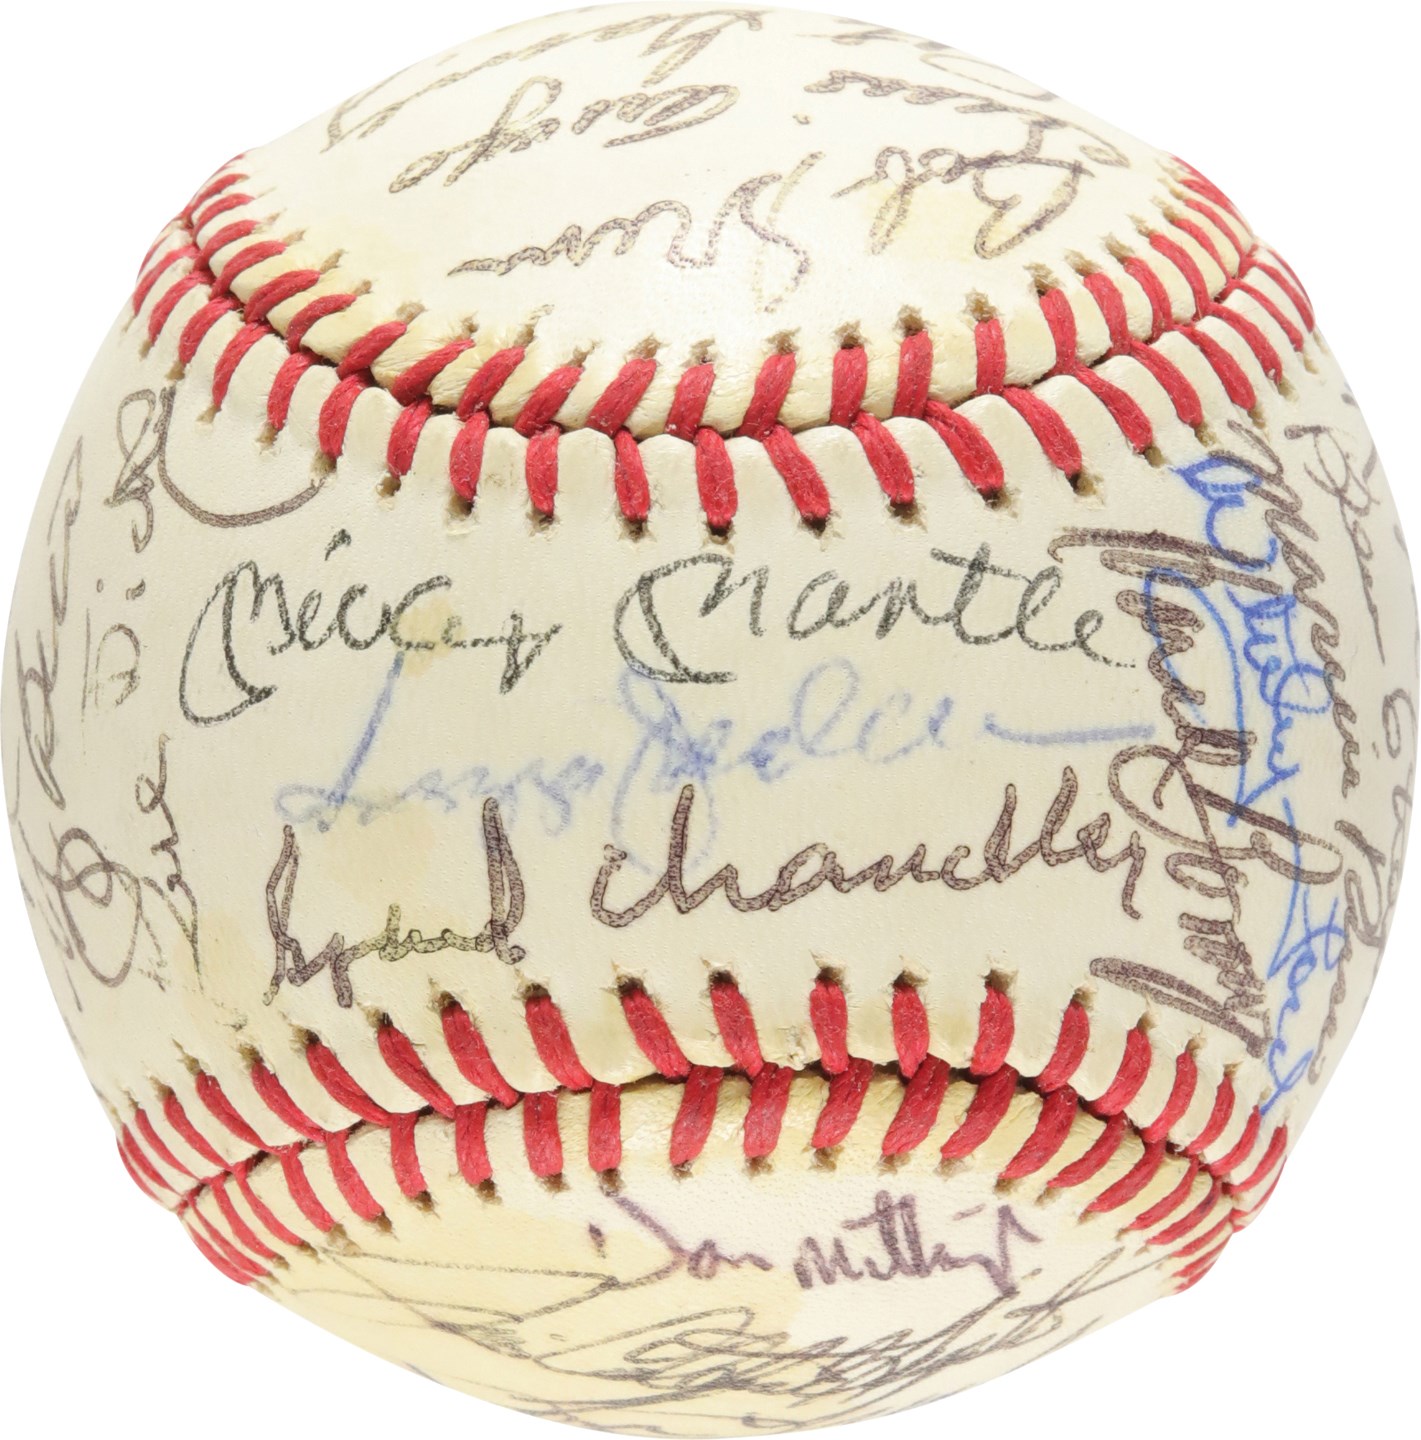 Baseball Autographs - New York Yankees Signed "History" Ball (36 Signatures Including Mantle, DiMaggio, Maris & Nine Other Hall of Famers) (PSA)